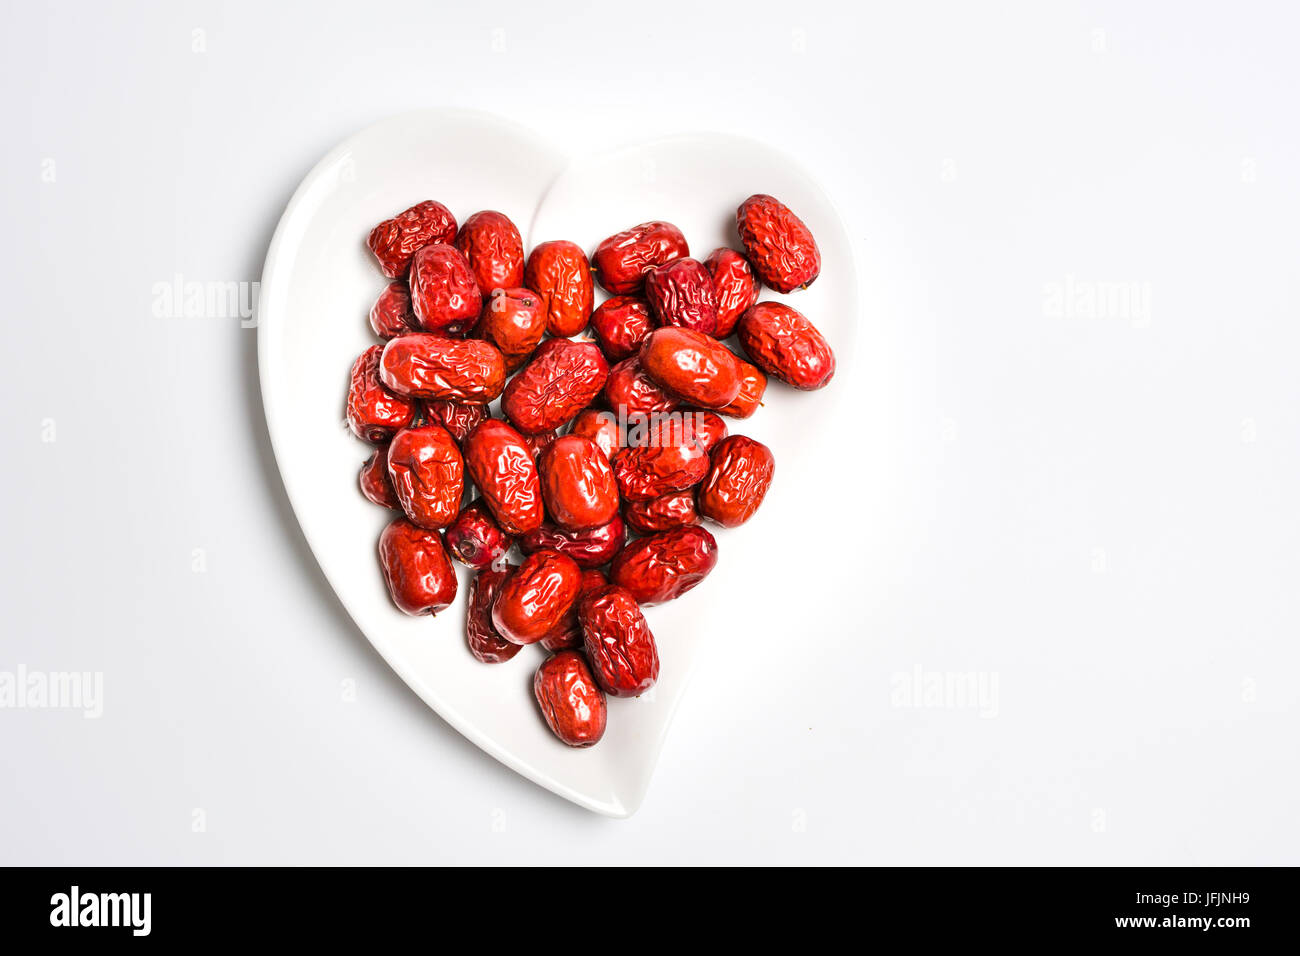 Jujube, Chinese dried red date fruit on a plate Stock Photo